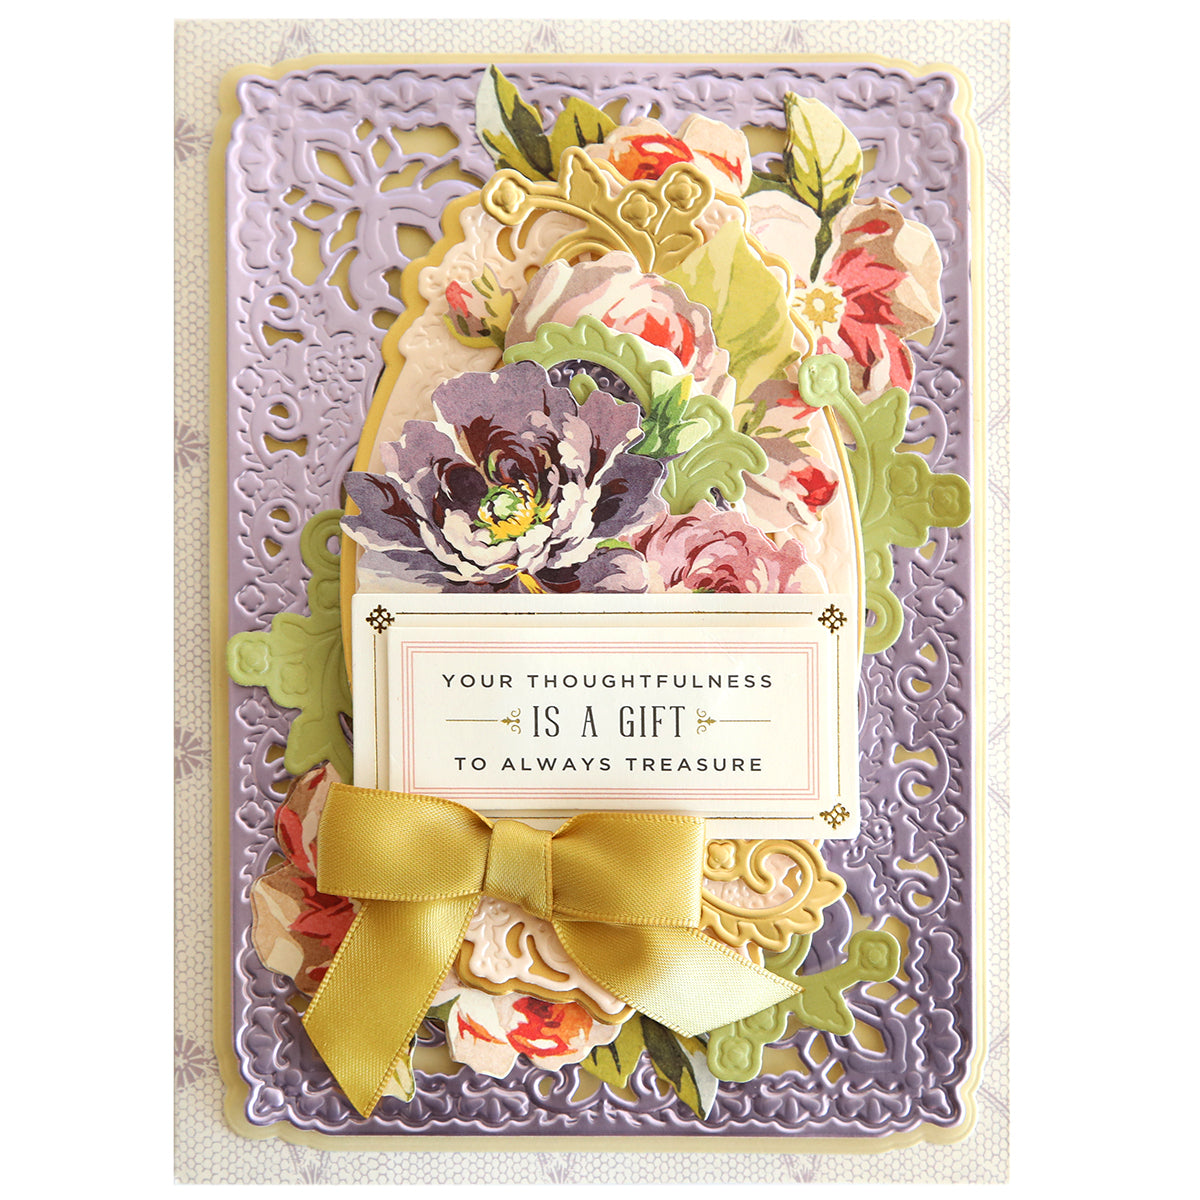 Greeting card with 3D floral design and a yellow bow, featuring text "your thoughtfulness is a gift to always treasure." Set against a scalloped purple frame with added Swing Out Dies embellishments.